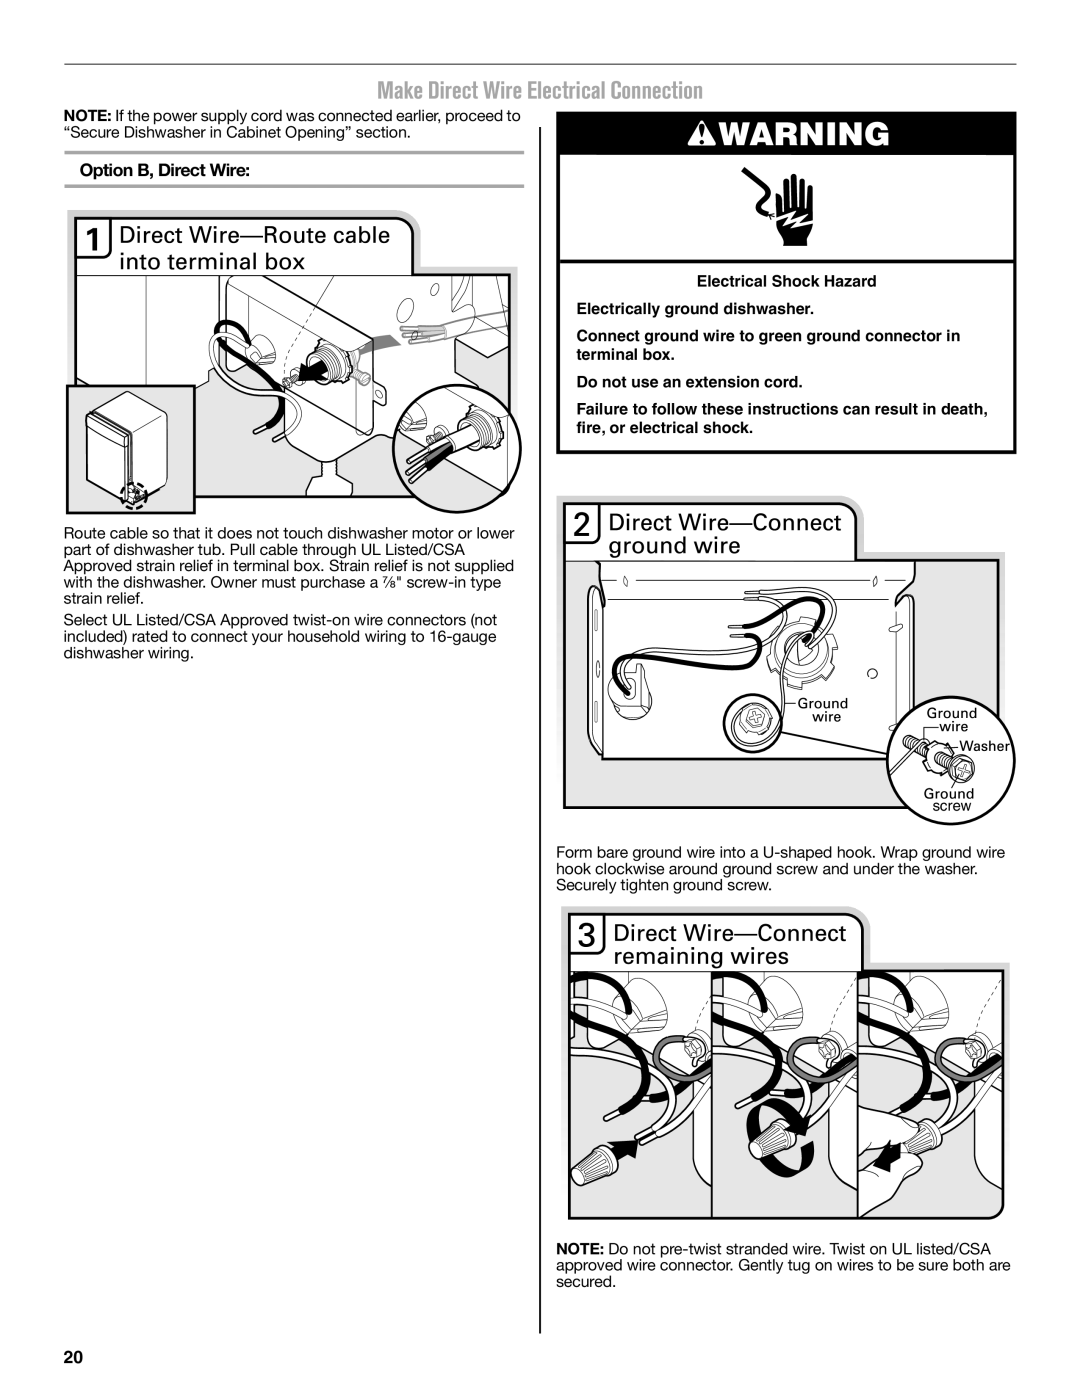 Maytag W10649077A installation instructions Make Direct Wire Electrical Connection, screw 